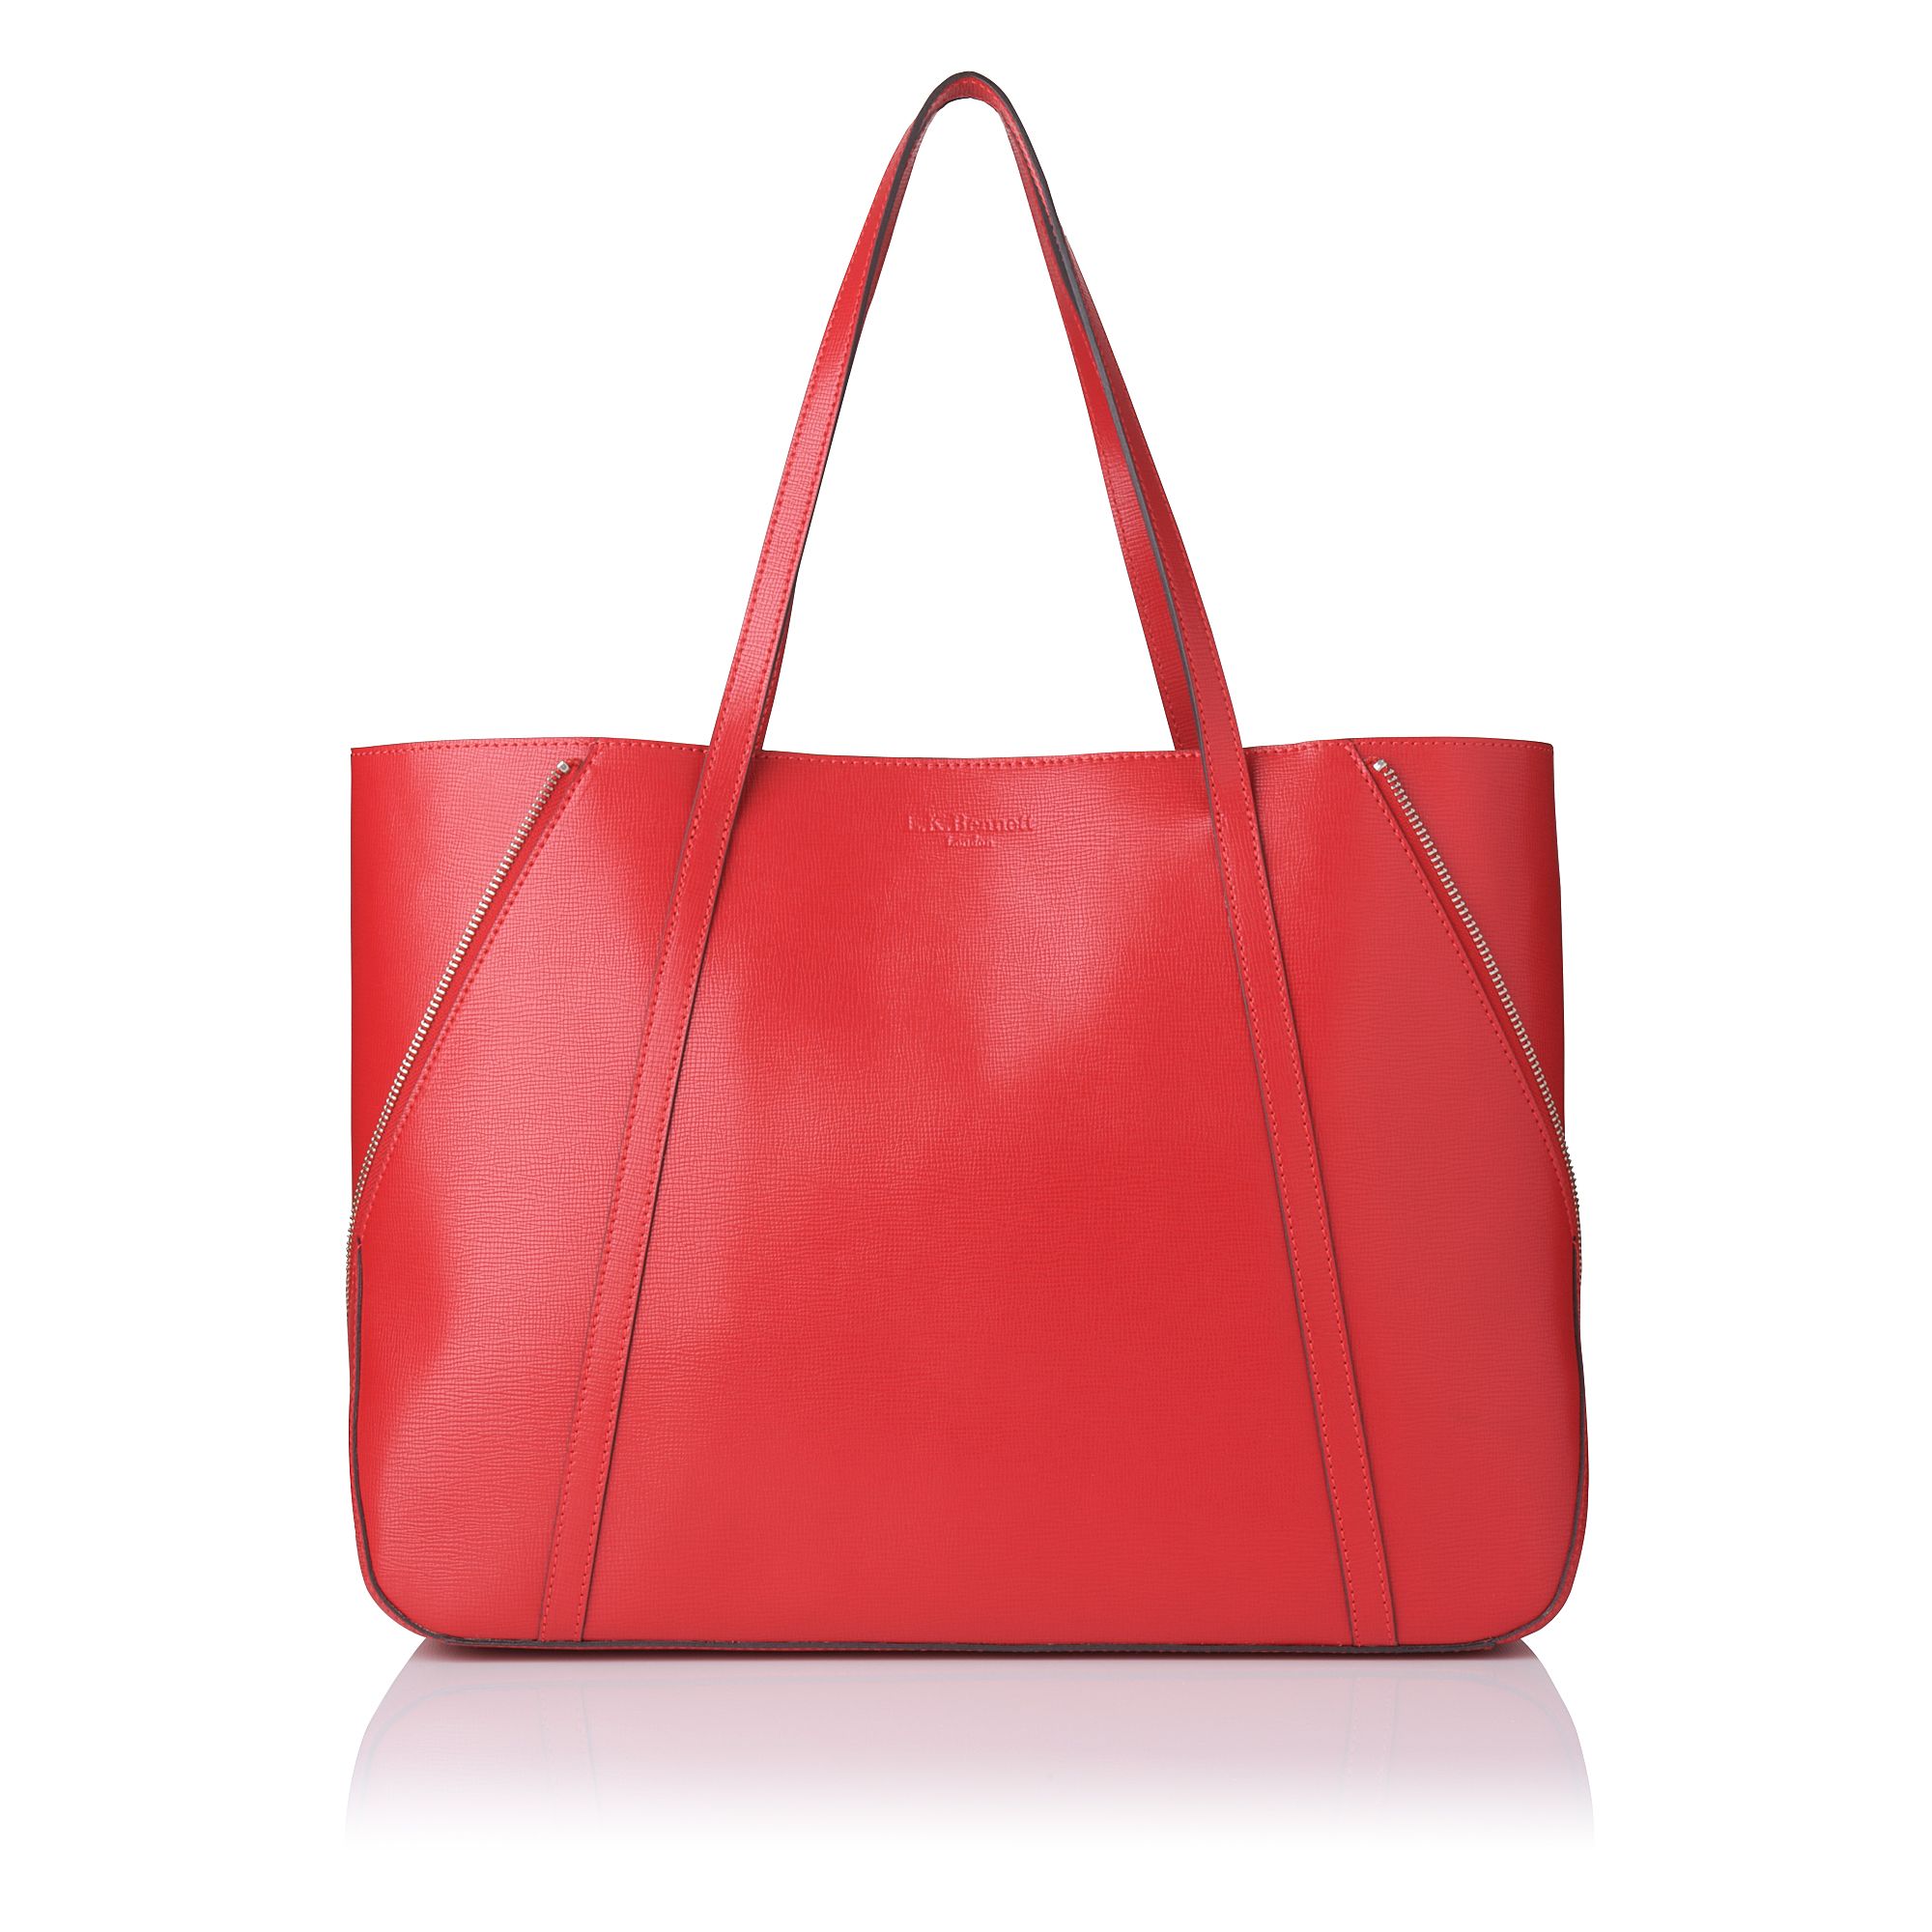 L.k.bennett Kelly Large Red Winged Tote Bag in Red | Lyst